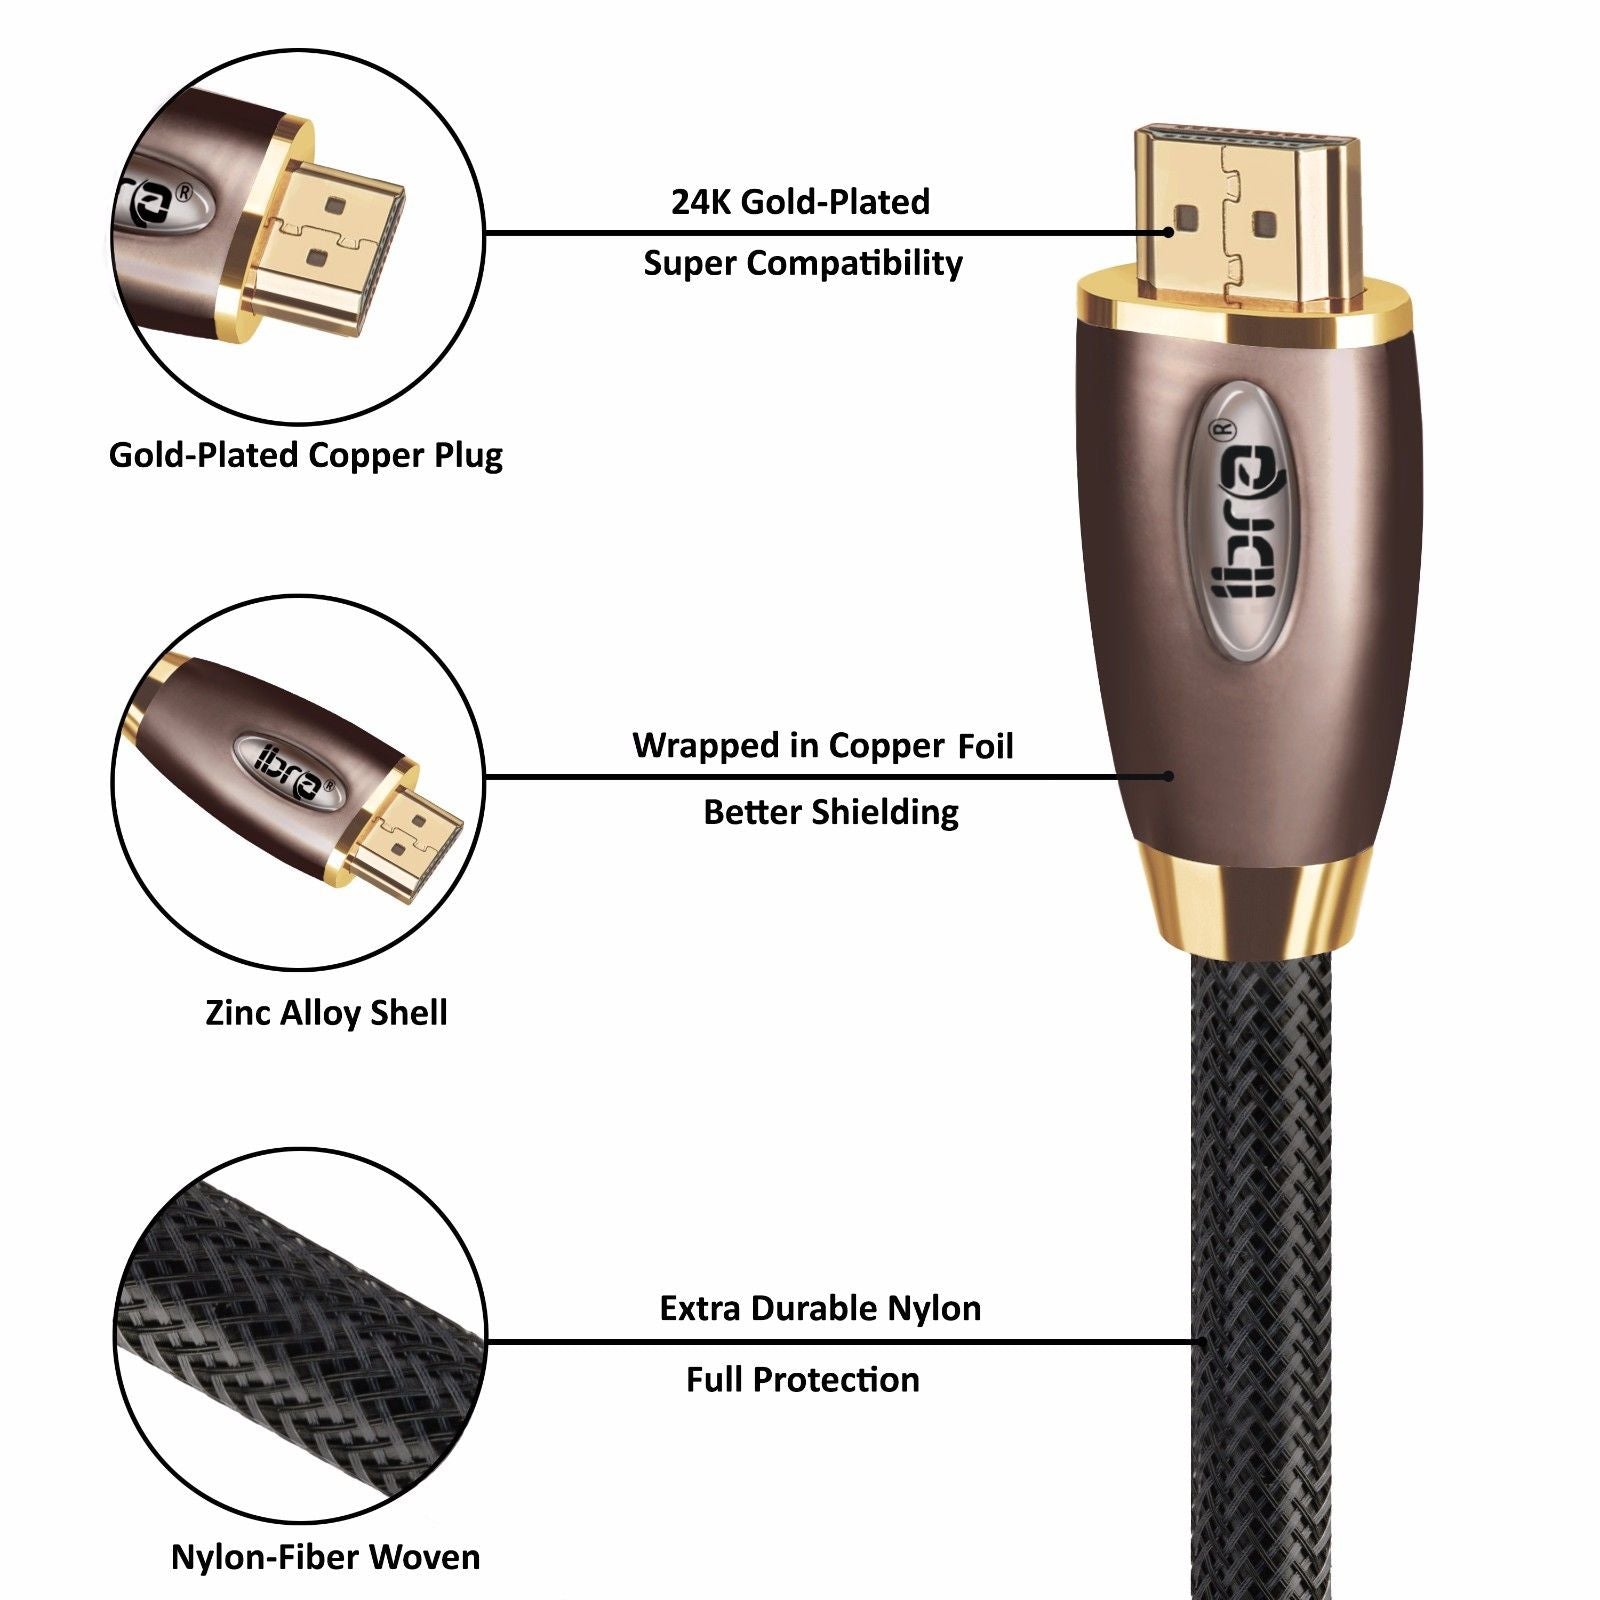 HDMI Cable 20M - 4K UHD HDMI 2.0(4K) Ready -18Gbps-28AWG Braided Cord -Gold Plated Connectors -Ethernet,Audio Return -Video 4K 2160p,HD 1080p,3D -Xbox PlayStation PS3 PS4 PC Apple TV -IBRA RED